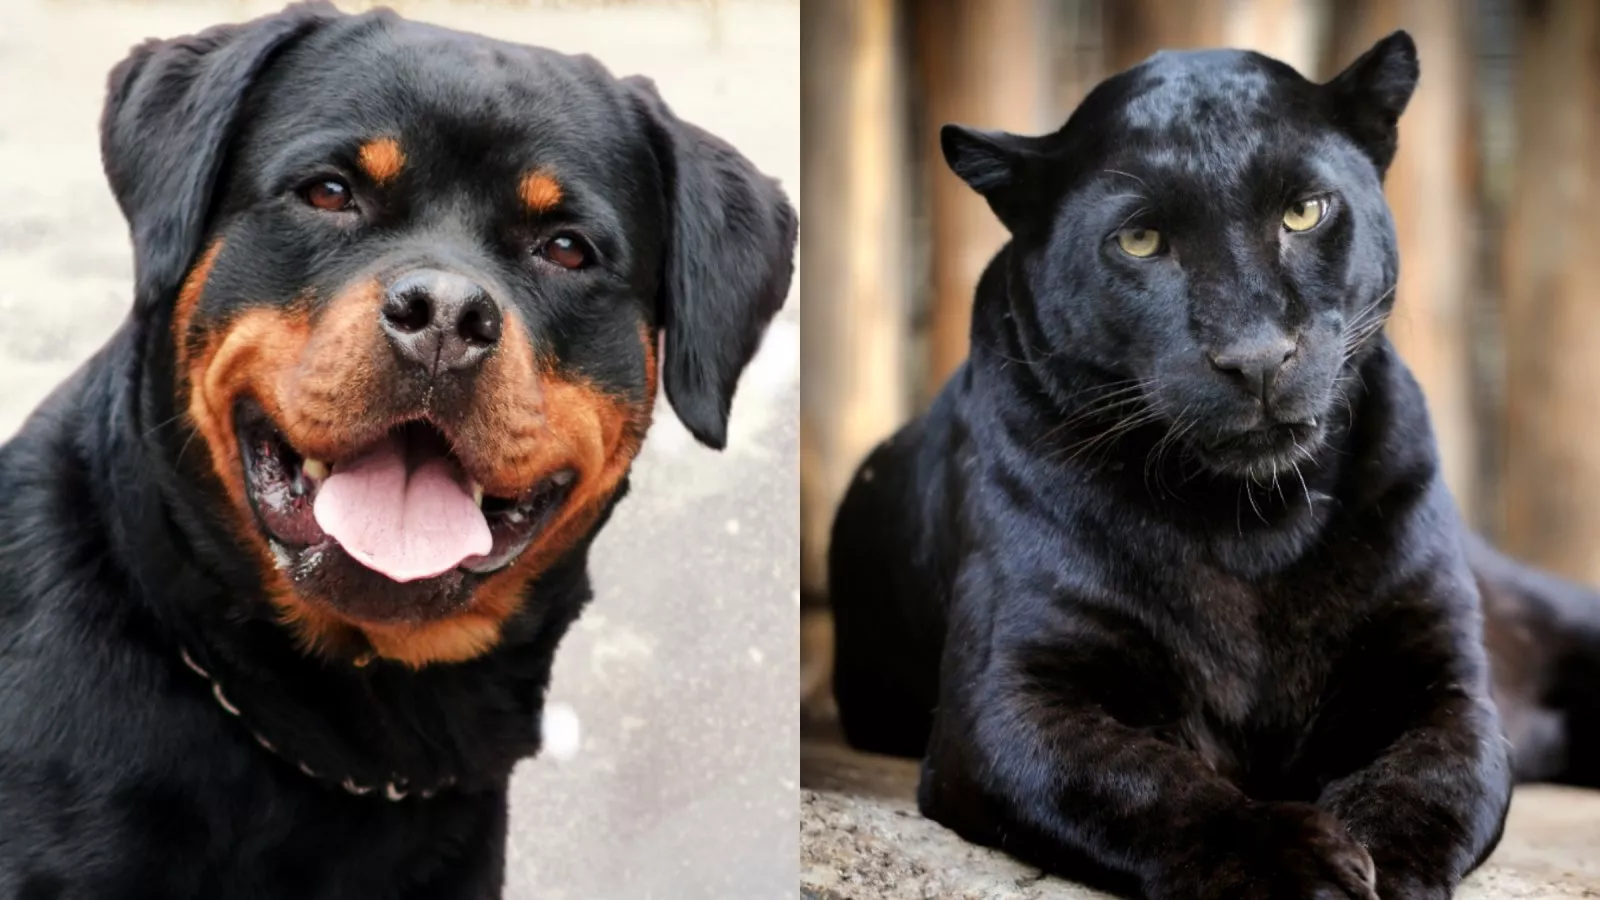 can a rottweiler kill a panther?